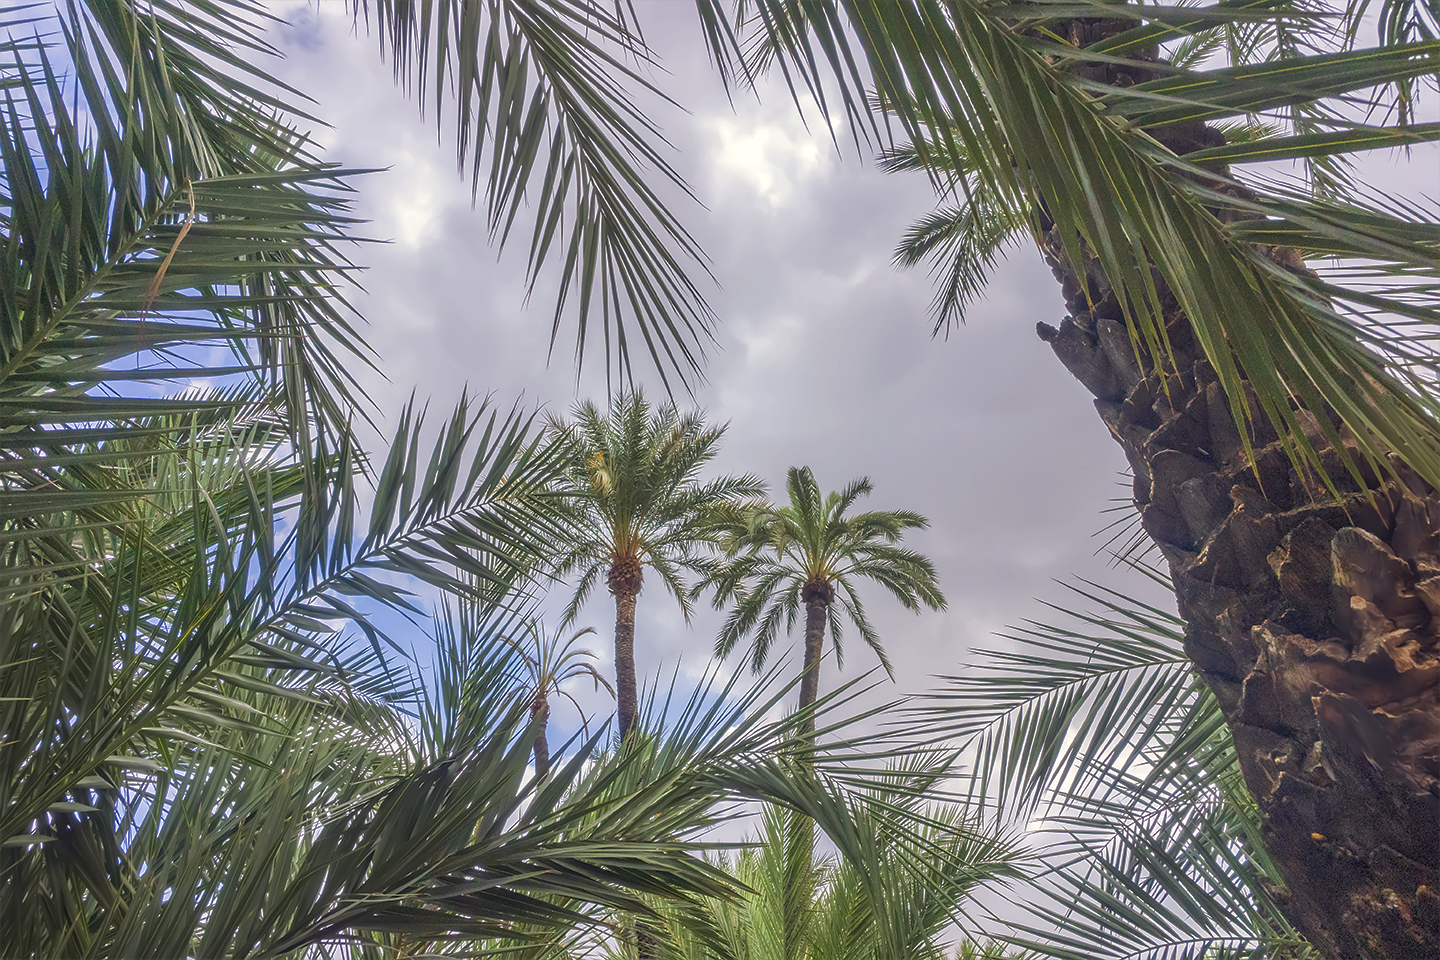 Image of the sky of Elche with palm trees.